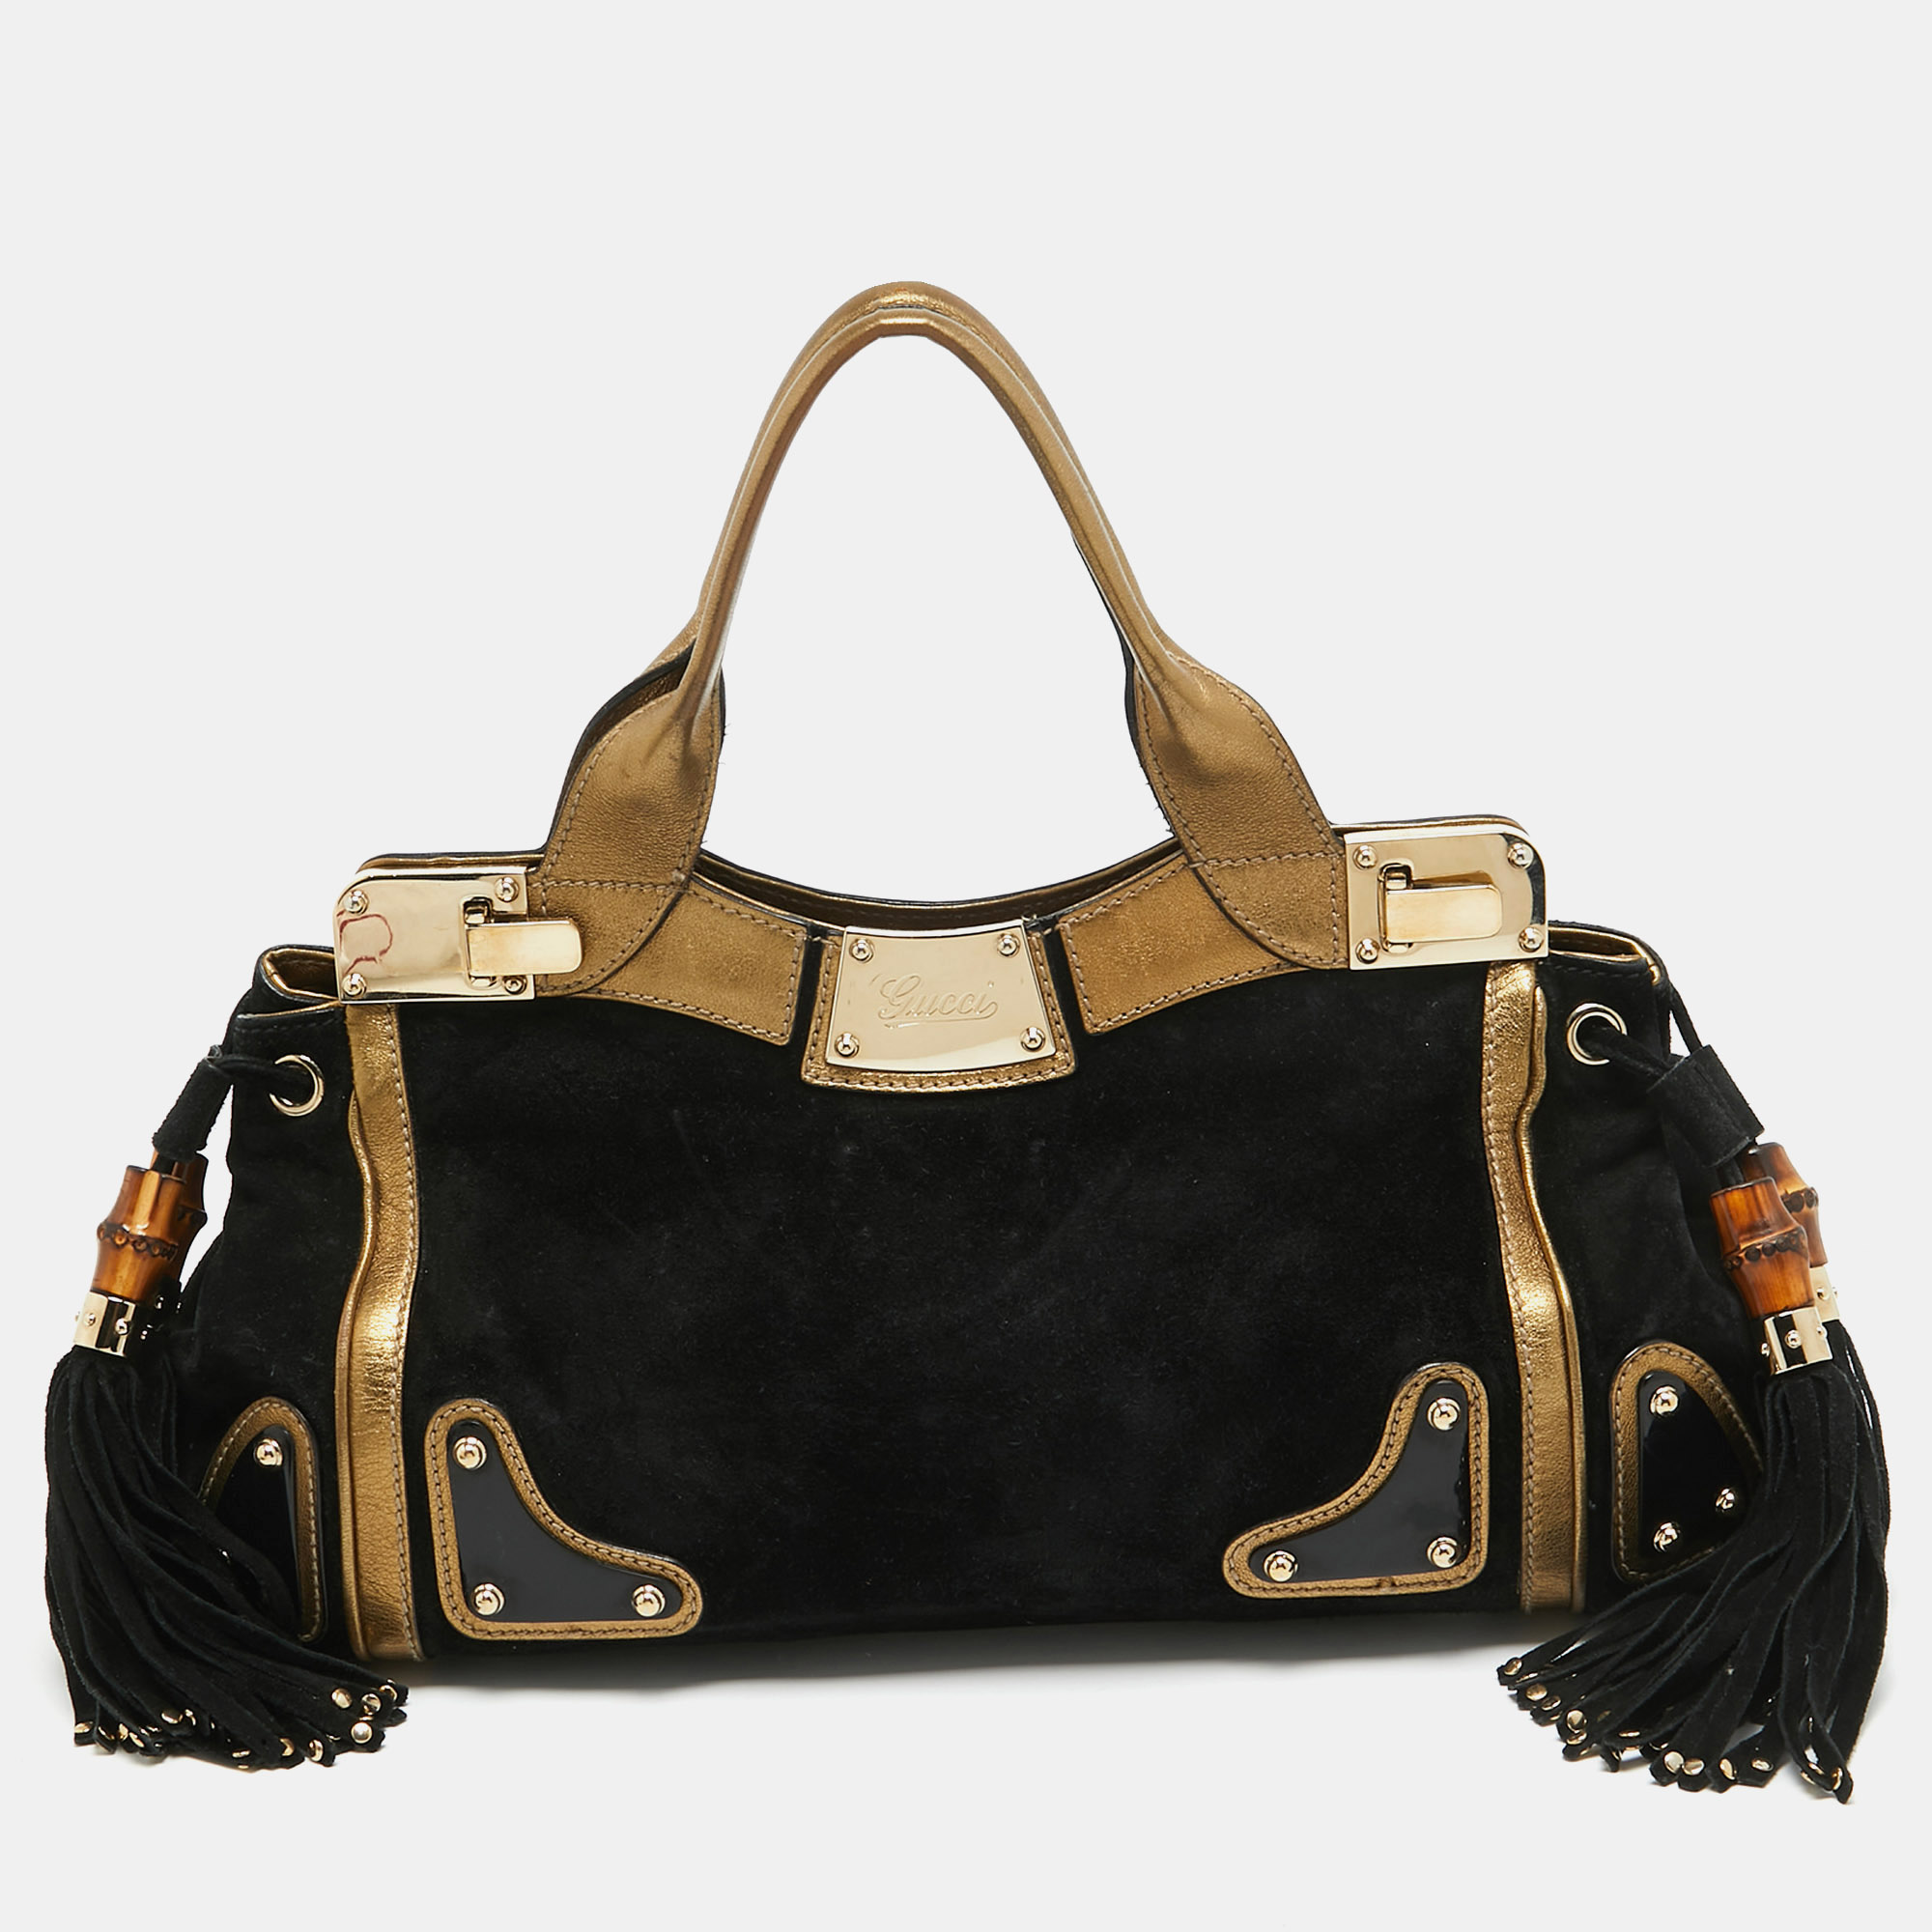 

Gucci Black/Gold Leather and Suede Tassel Race Bag